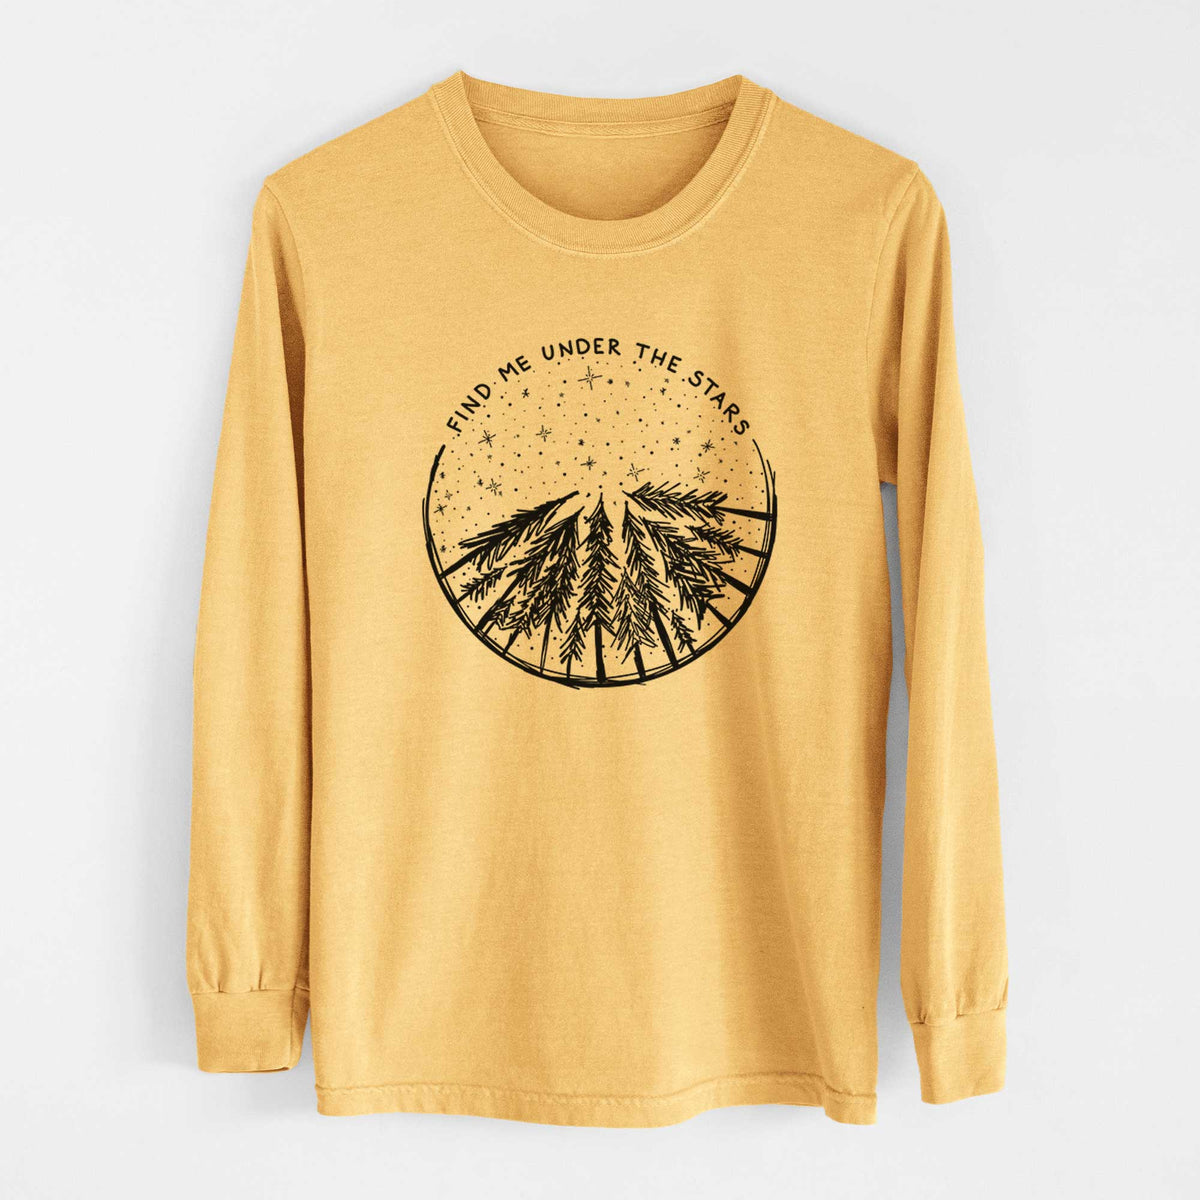 Find Me Under the Stars - Heavyweight 100% Cotton Long Sleeve